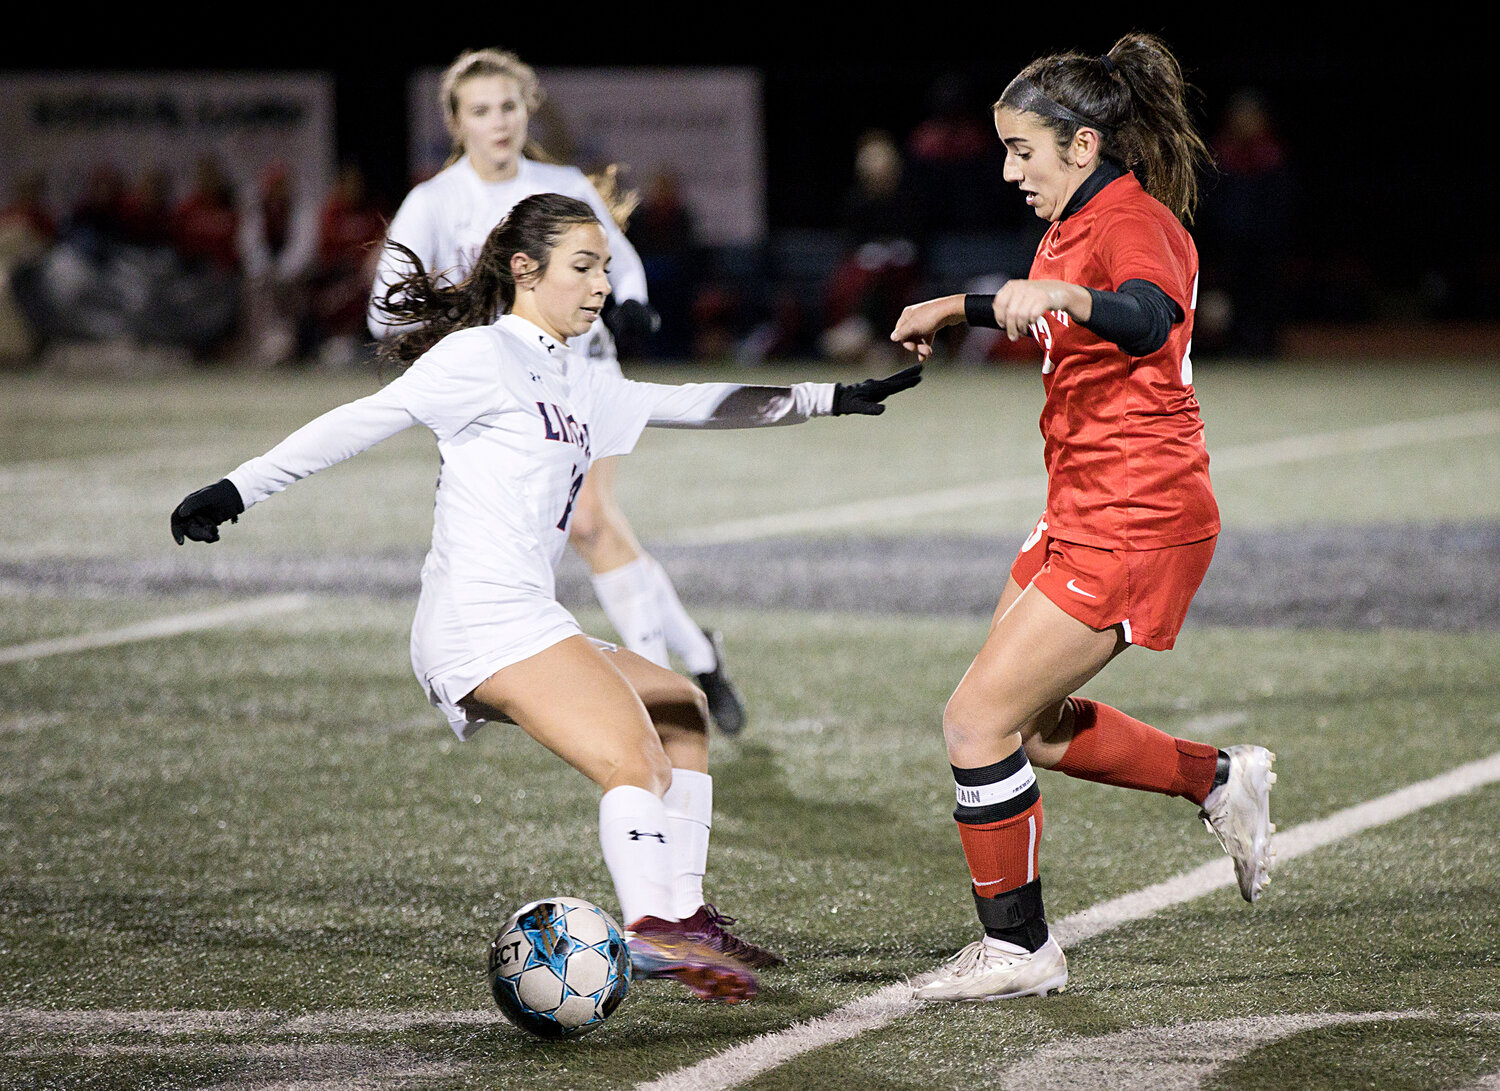 Sophia Karousos is pressured by a Lincoln opponent while advancing the ball.